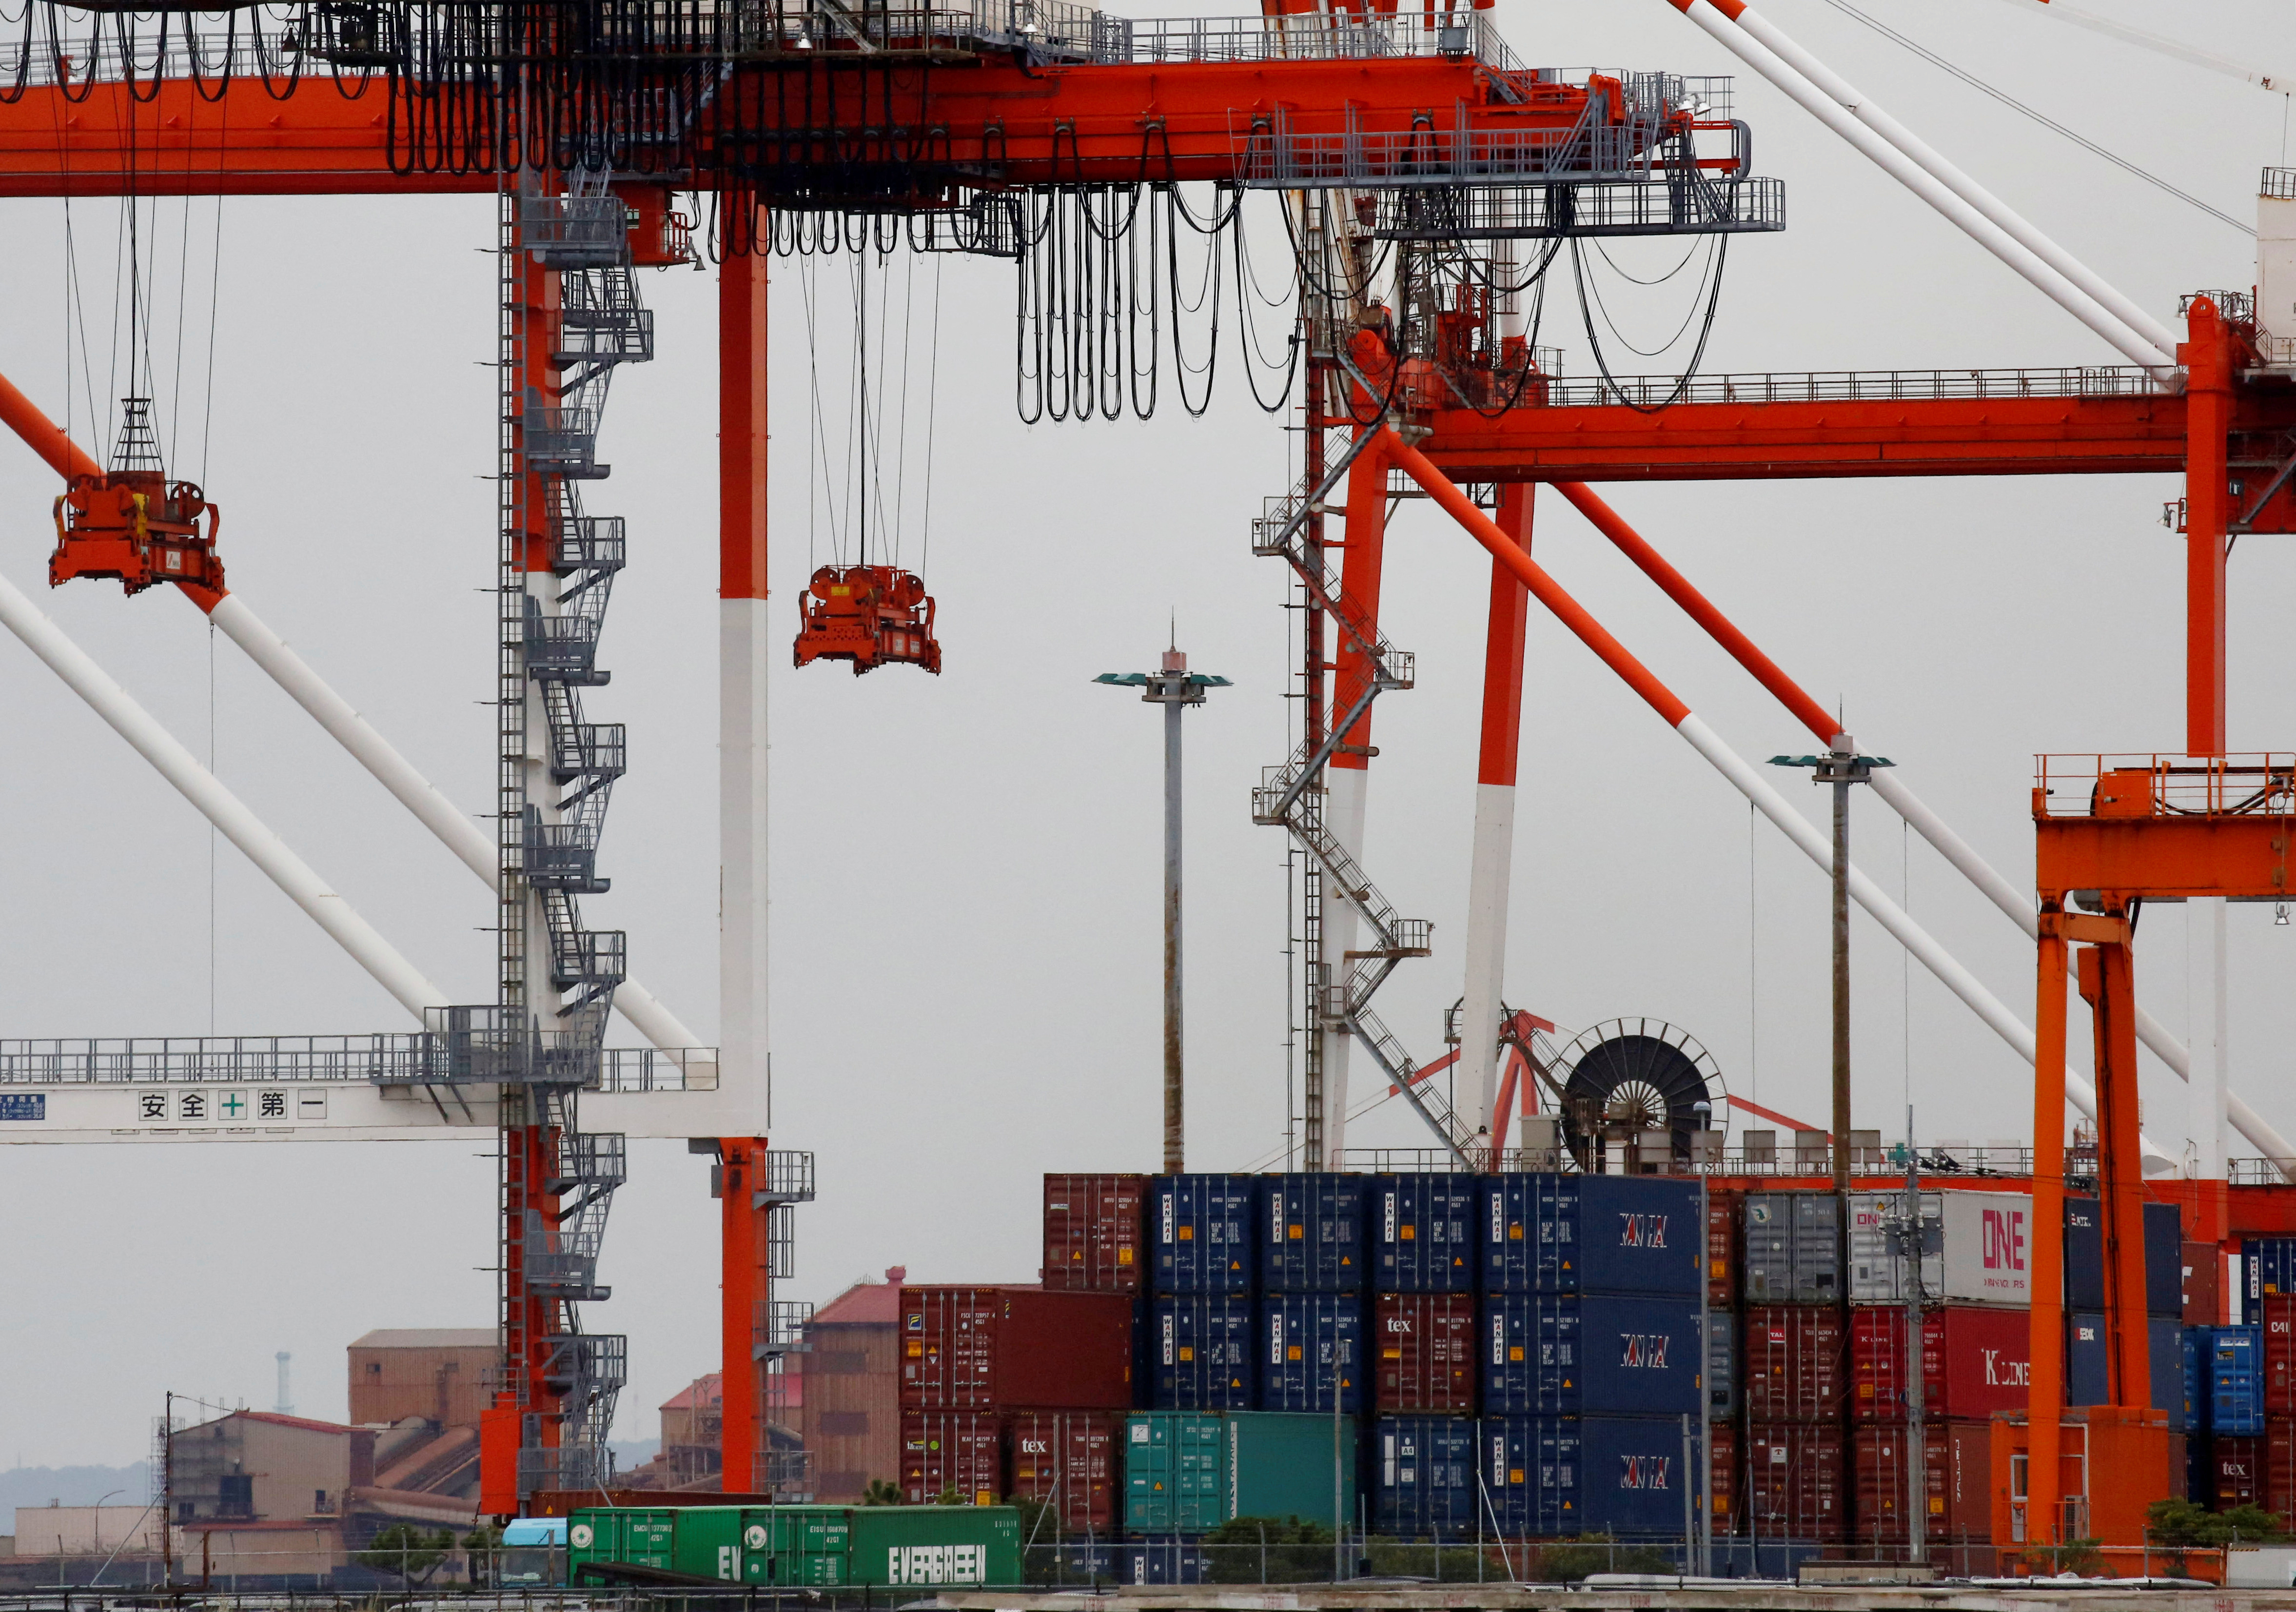 Containers are seen at an industrial port in the Keihin Industrial Zone in Kawasaki